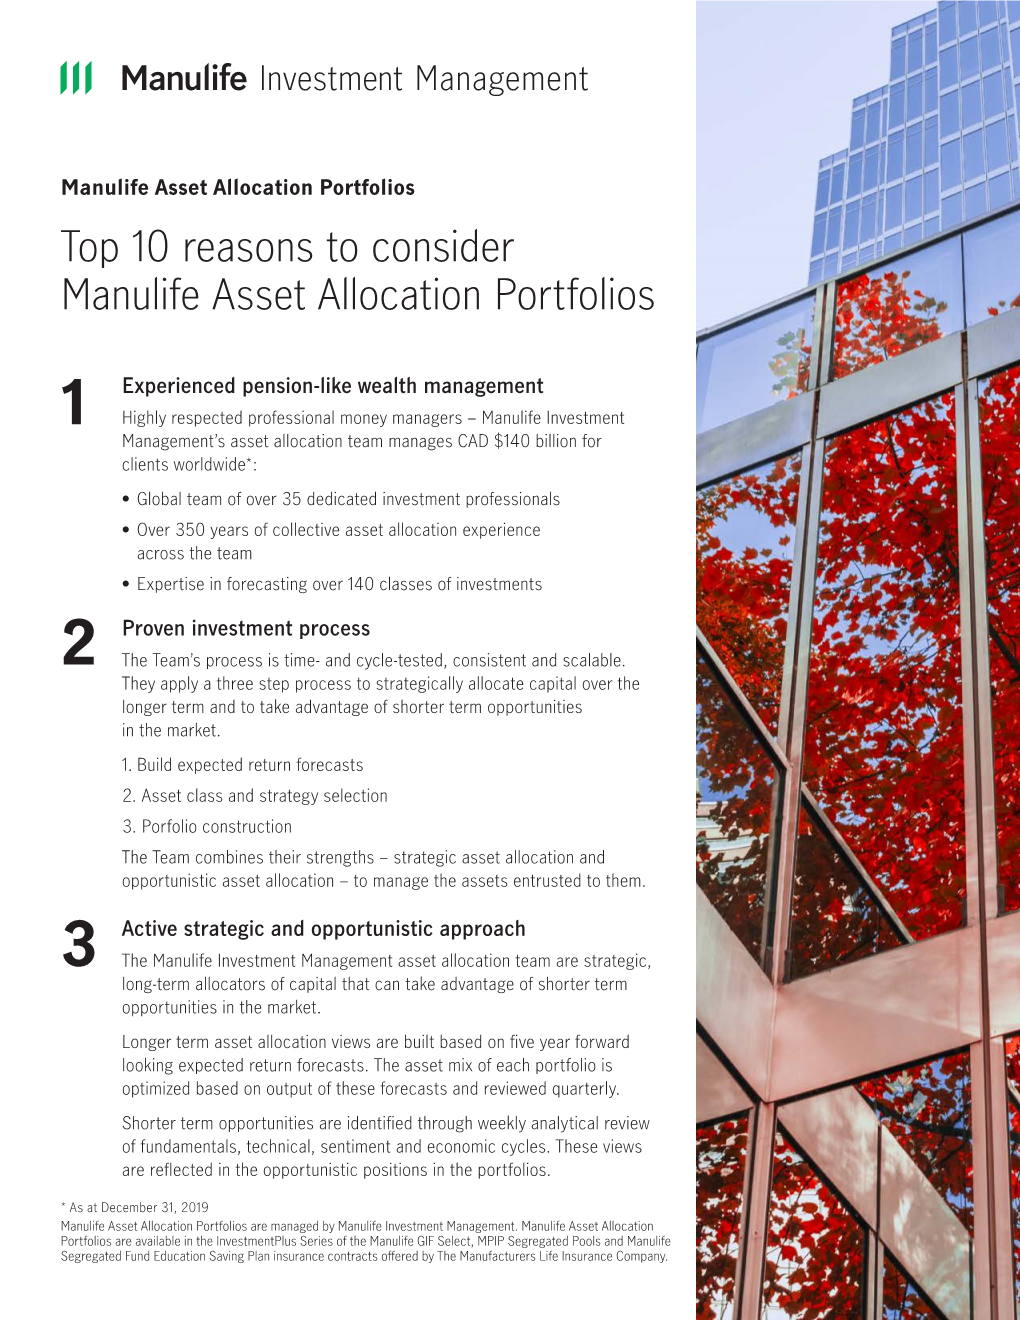 Manulife Asset Allocation: Top 10